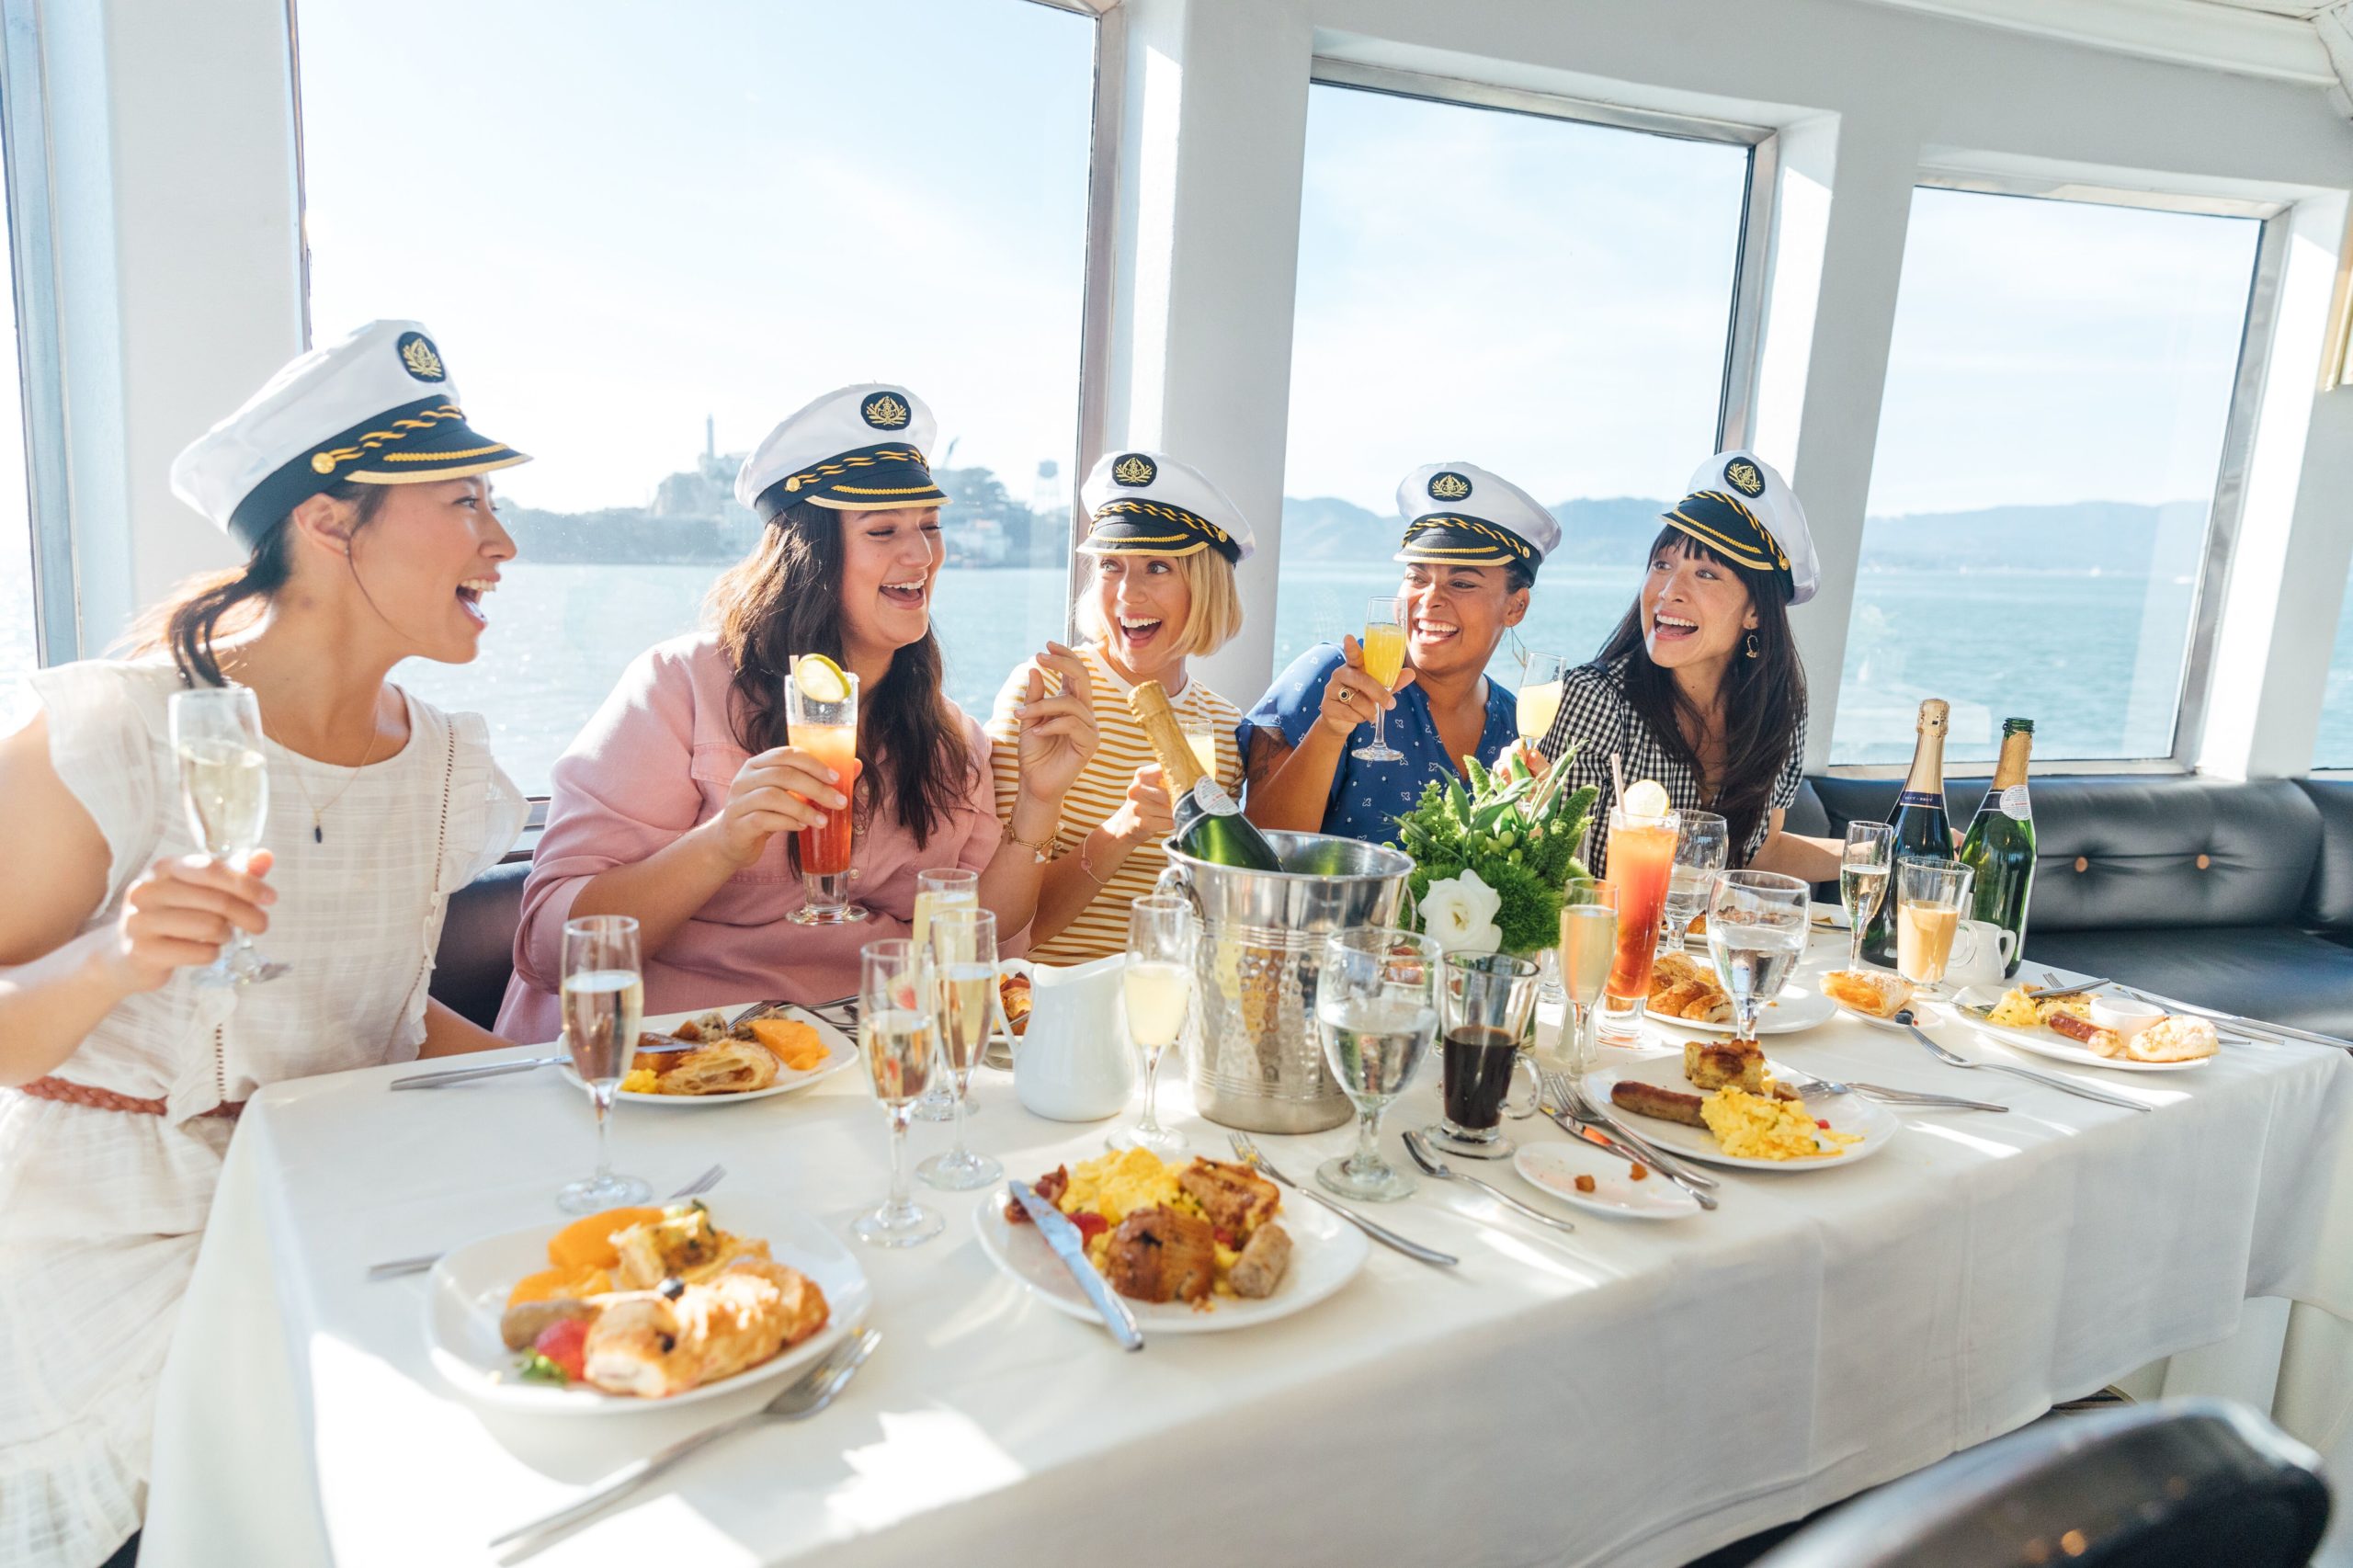 Group of girls having brunch on dining cruise in Marina del Rey